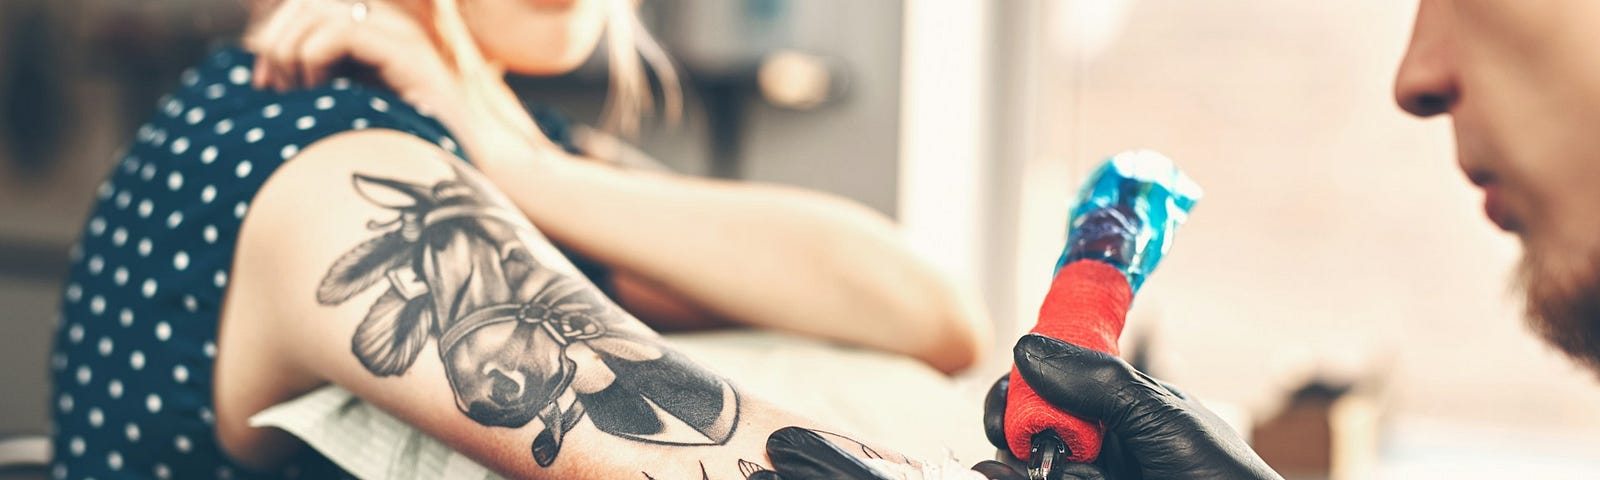 A woman getting a tattoo. A new study suggests getting a tattoo can boost your risk of getting one type of cancer.